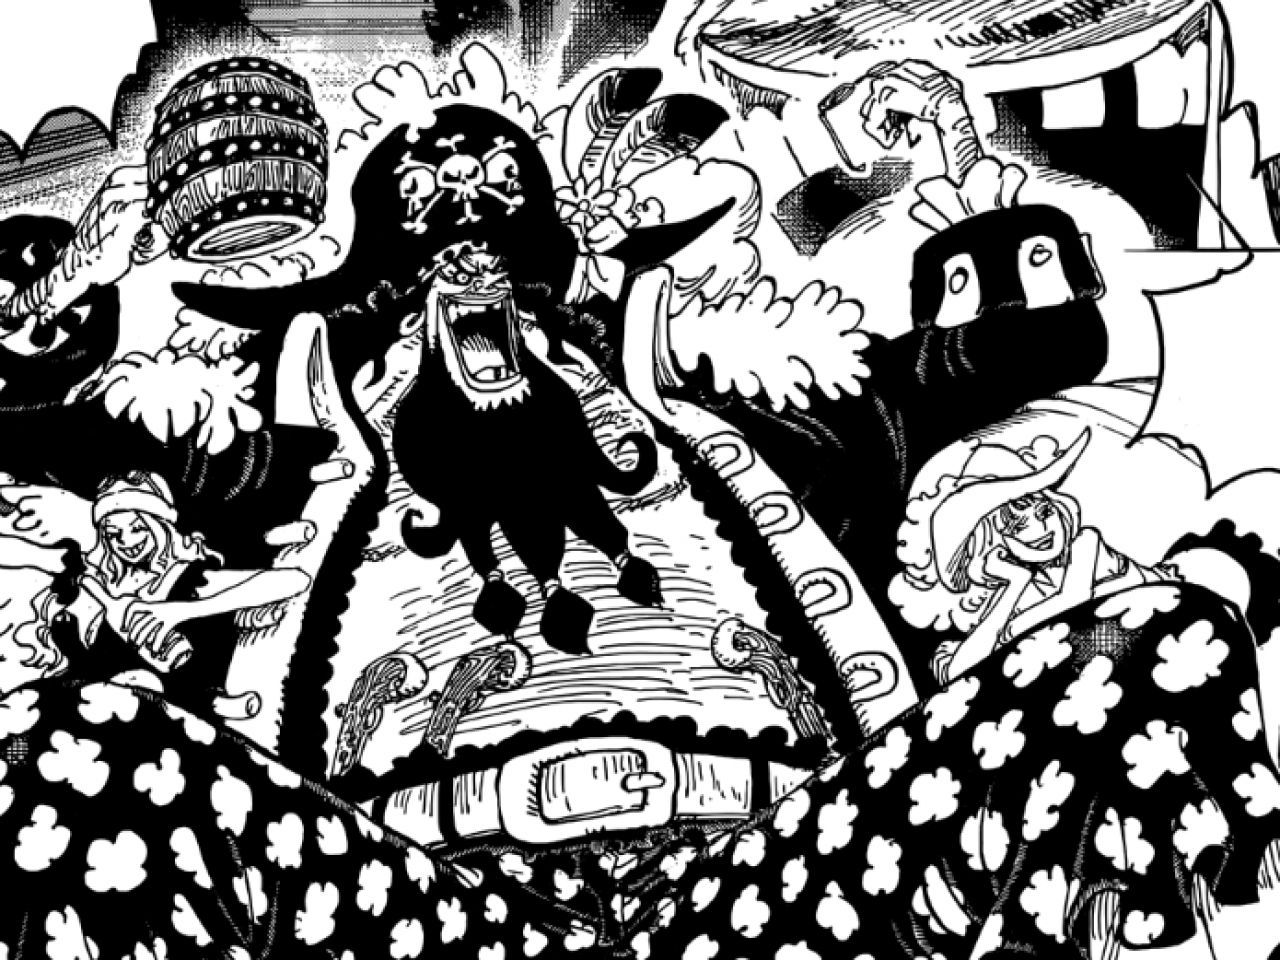 Not just ONE PIECE: What was the size of Blackbeard in reality? 